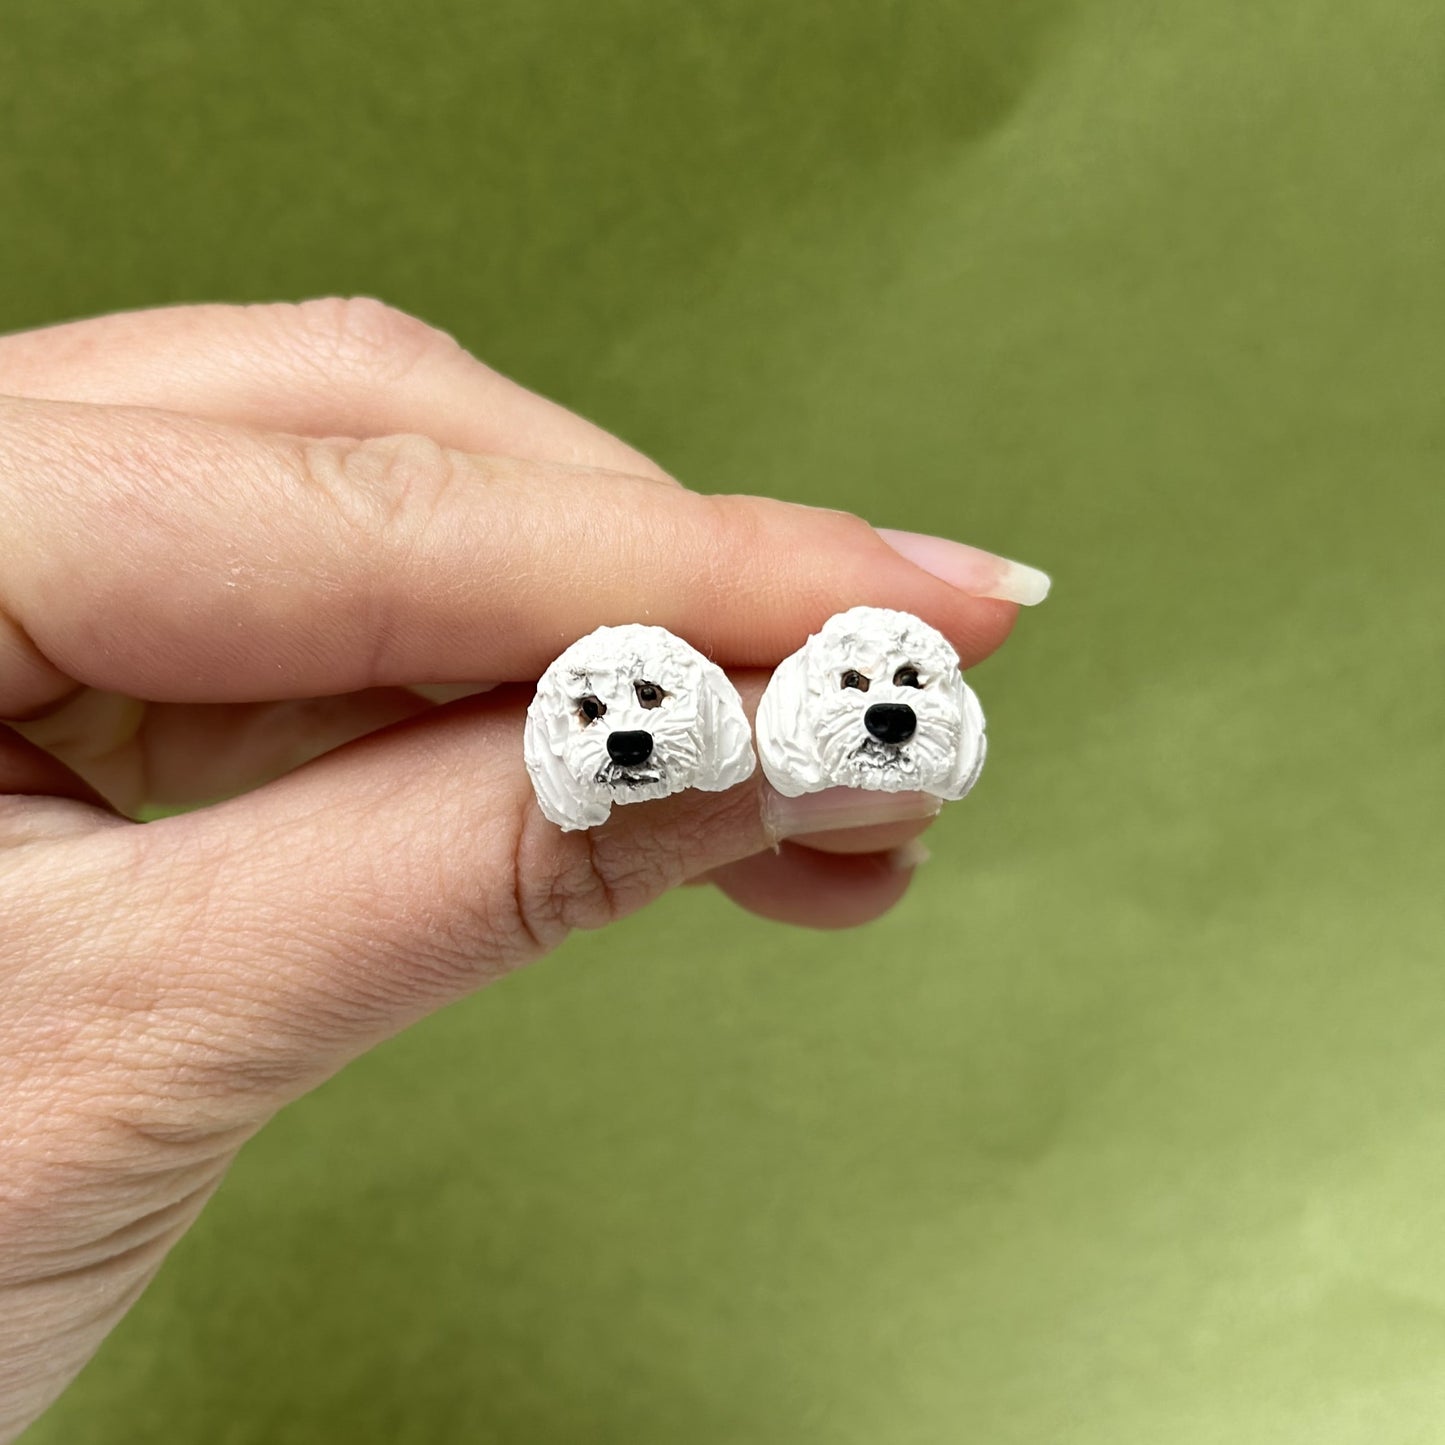 Handmade white poodle stud earrings by Pawfect Love, positioned on green background